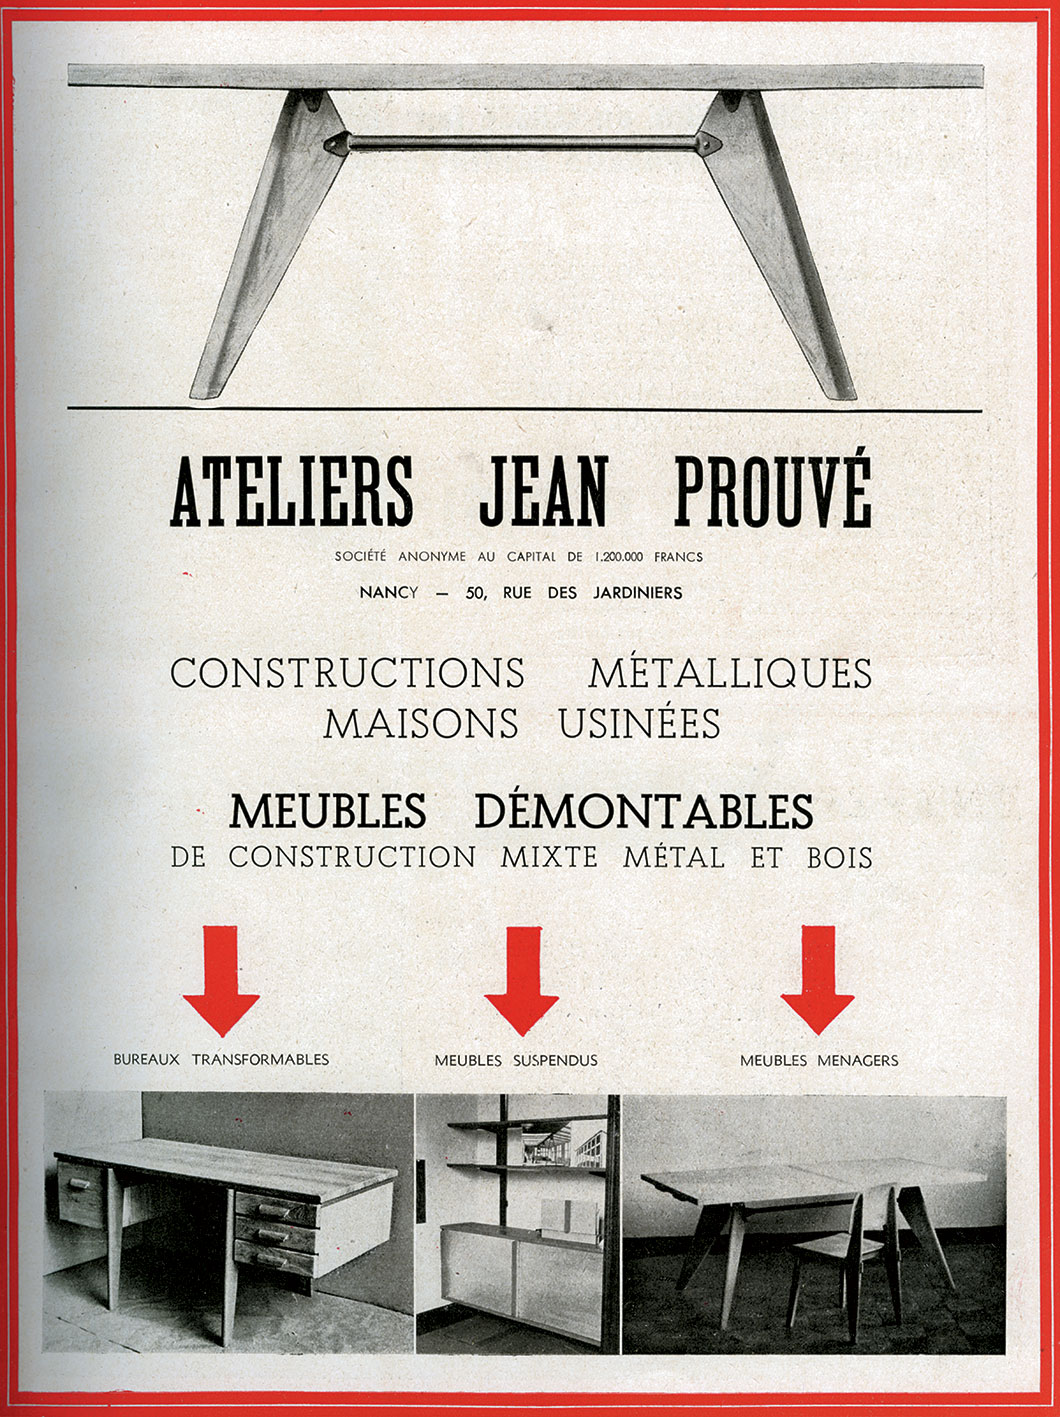 Advertisement from the Ateliers Jean Prouvé, in <i>L’Architecture d’aujourd’hui,</i> no. 2, July-August 1945.